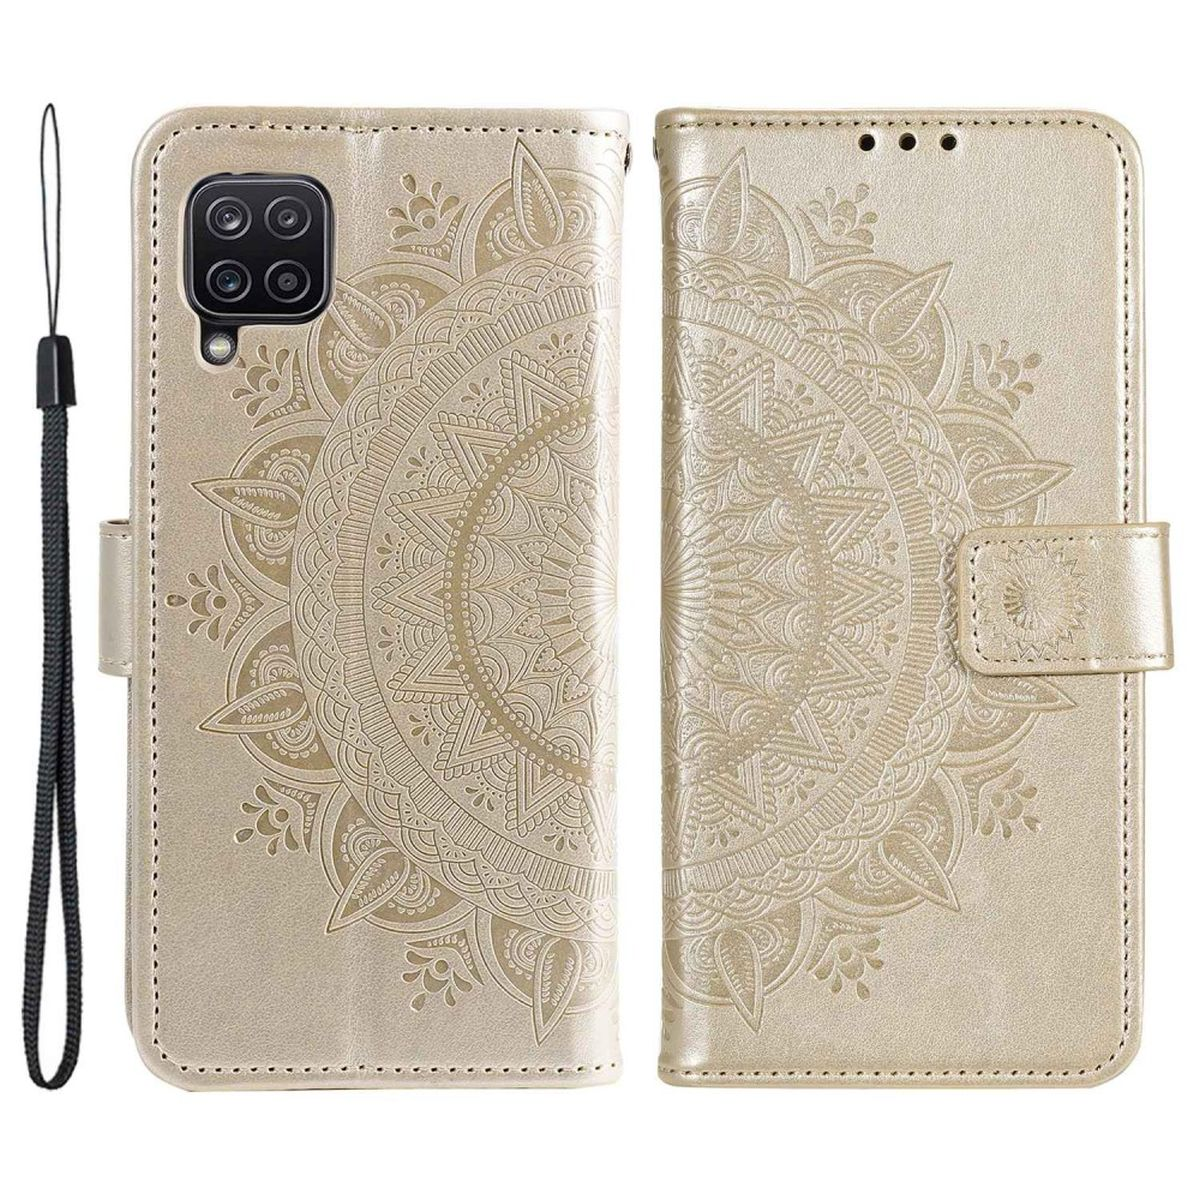 mit M33 COVERKINGZ 5G, Samsung, Klapphülle Galaxy Bookcover, Mandala Muster, Gold